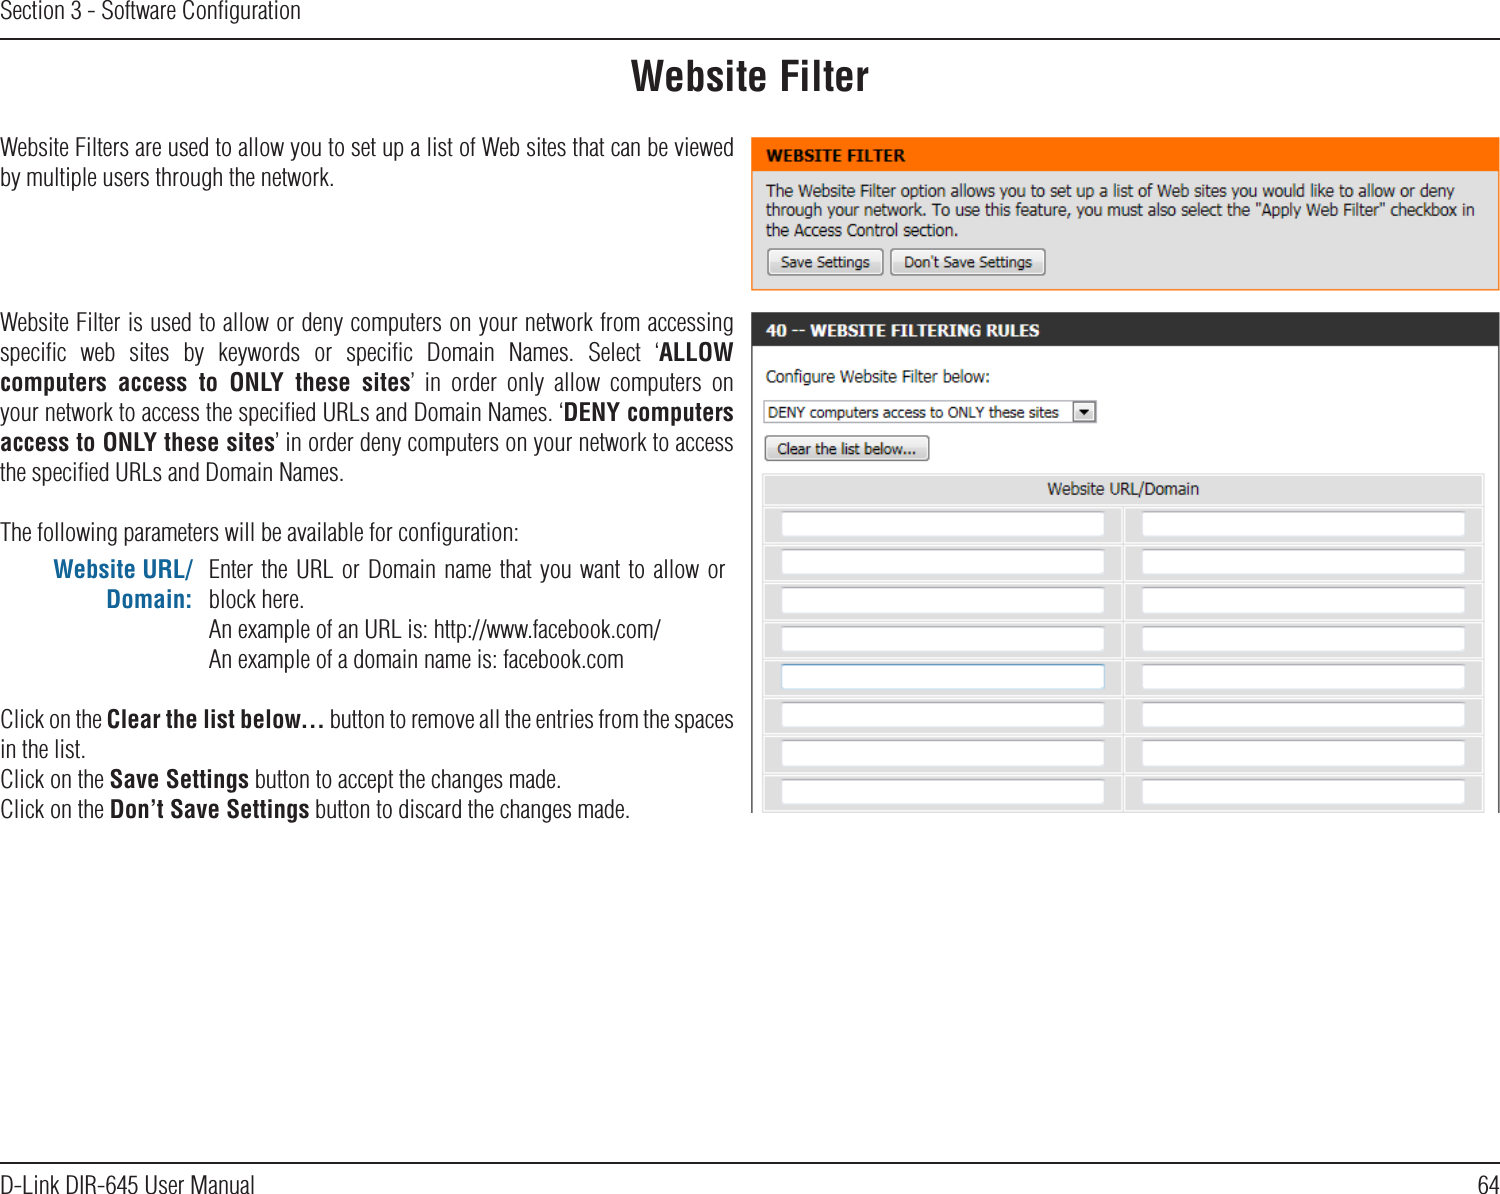 64D-Link DIR-645 User ManualSection 3 - Software ConﬁgurationWebsite FilterWebsite Filters are used to allow you to set up a list of Web sites that can be viewed by multiple users through the network.Website Filter is used to allow or deny computers on your network from accessing speciﬁc  web  sites  by  keywords  or  speciﬁc  Domain  Names.  Select  ‘ALLOW computers  access  to  ONLY  these  sites’  in  order  only  allow  computers  on your network to access the speciﬁed URLs and Domain Names. ‘DENY computers access to ONLY these sites’ in order deny computers on your network to access the speciﬁed URLs and Domain Names.The following parameters will be available for conﬁguration:Website URL/Domain:Enter the URL  or Domain name that you want to  allow or block here.An example of an URL is: http://www.facebook.com/An example of a domain name is: facebook.comClick on the Clear the list below... button to remove all the entries from the spaces in the list.Click on the Save Settings button to accept the changes made.Click on the Don’t Save Settings button to discard the changes made.